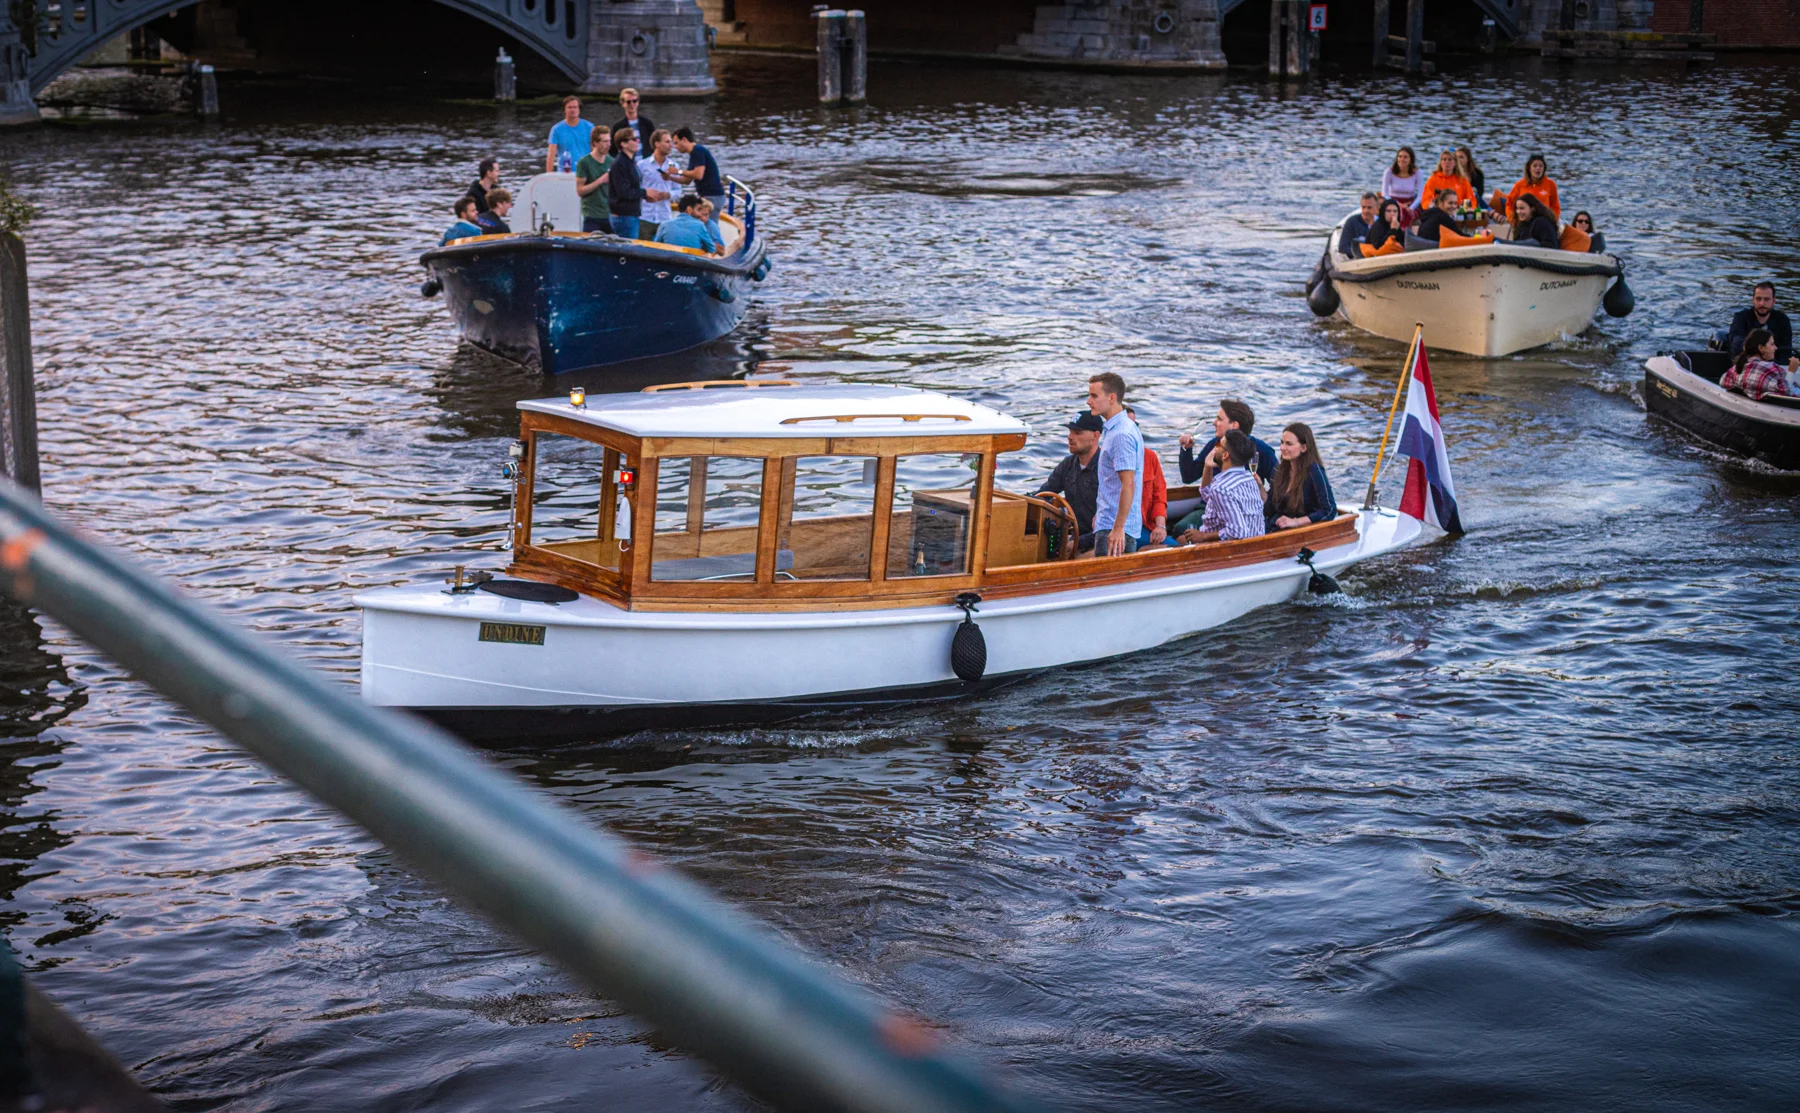 Unlimited Wine Tasting  in Historic Saloon Boat: A Cruise Through Amsterdam's Canals - 1284838